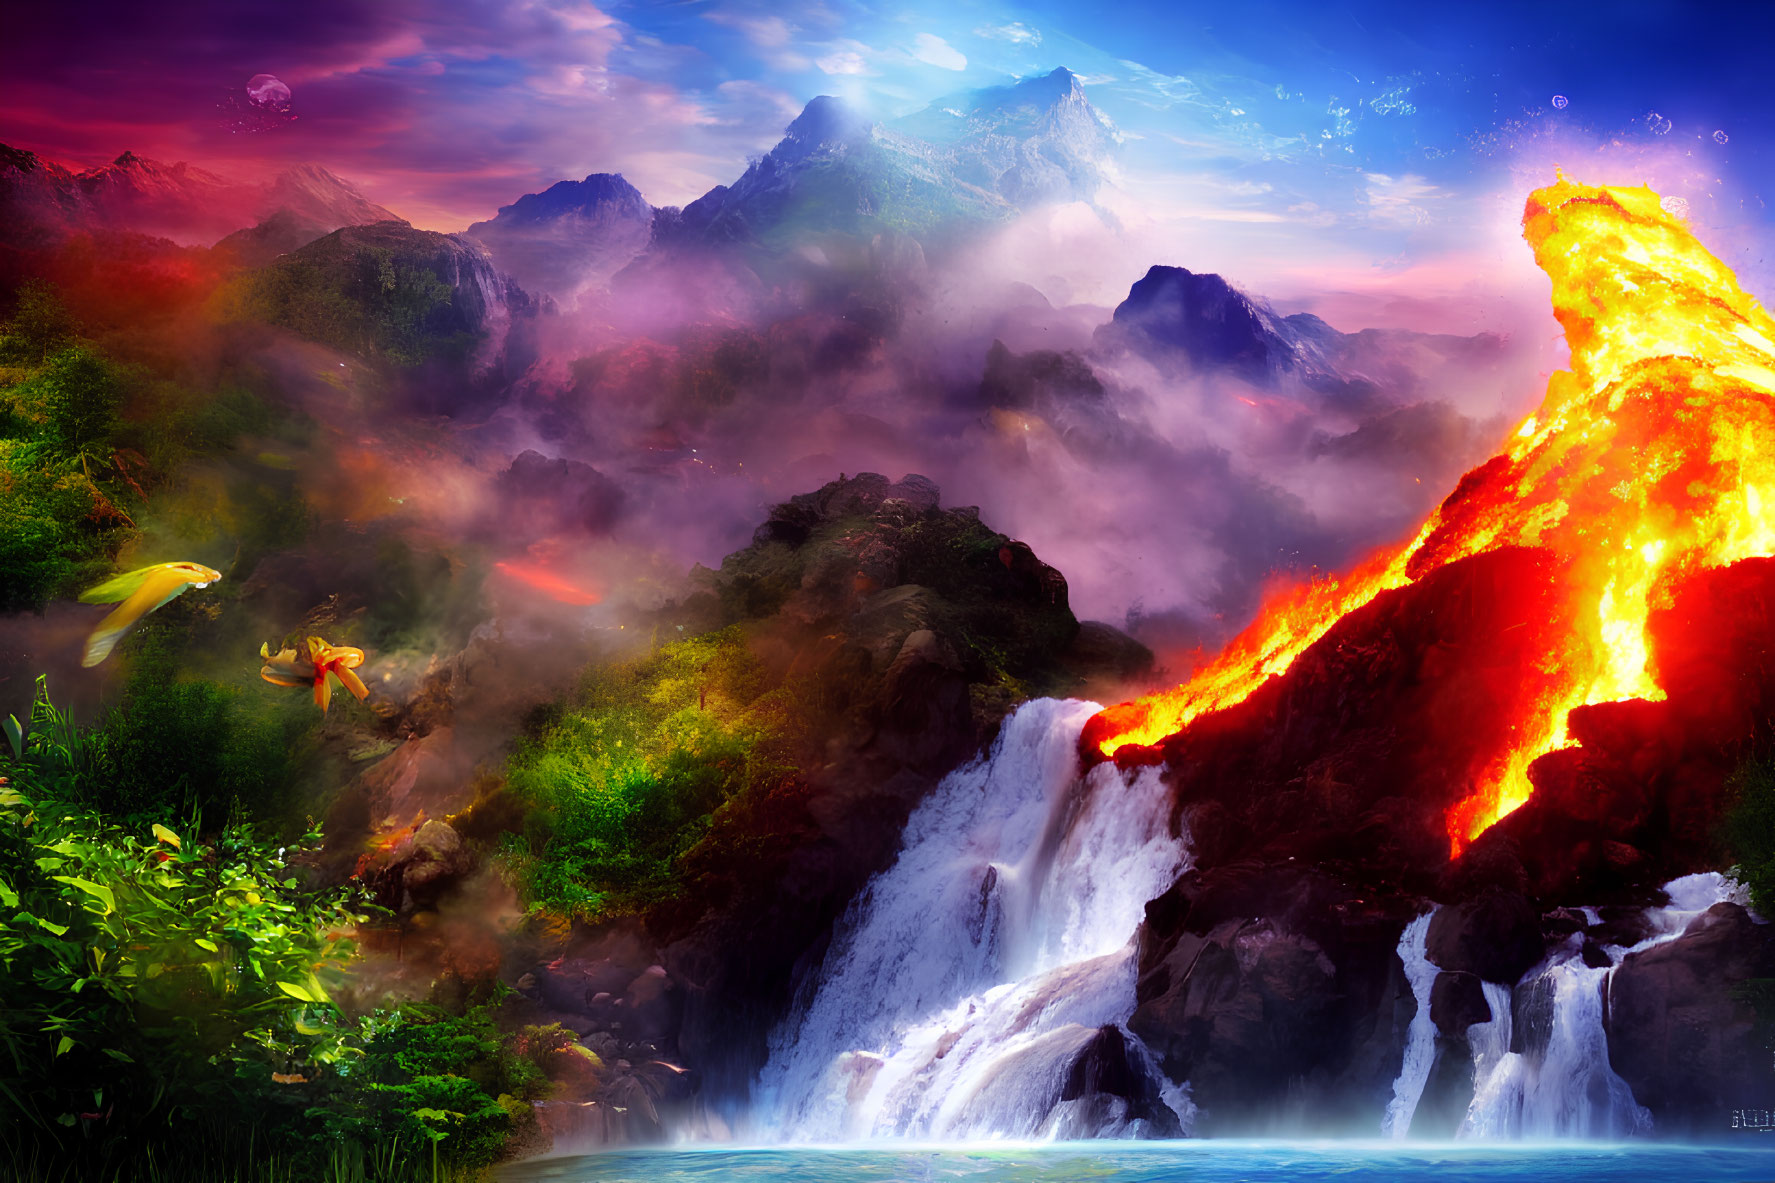 Fantasy landscape with erupting volcano, waterfalls, mountains, and flying person.